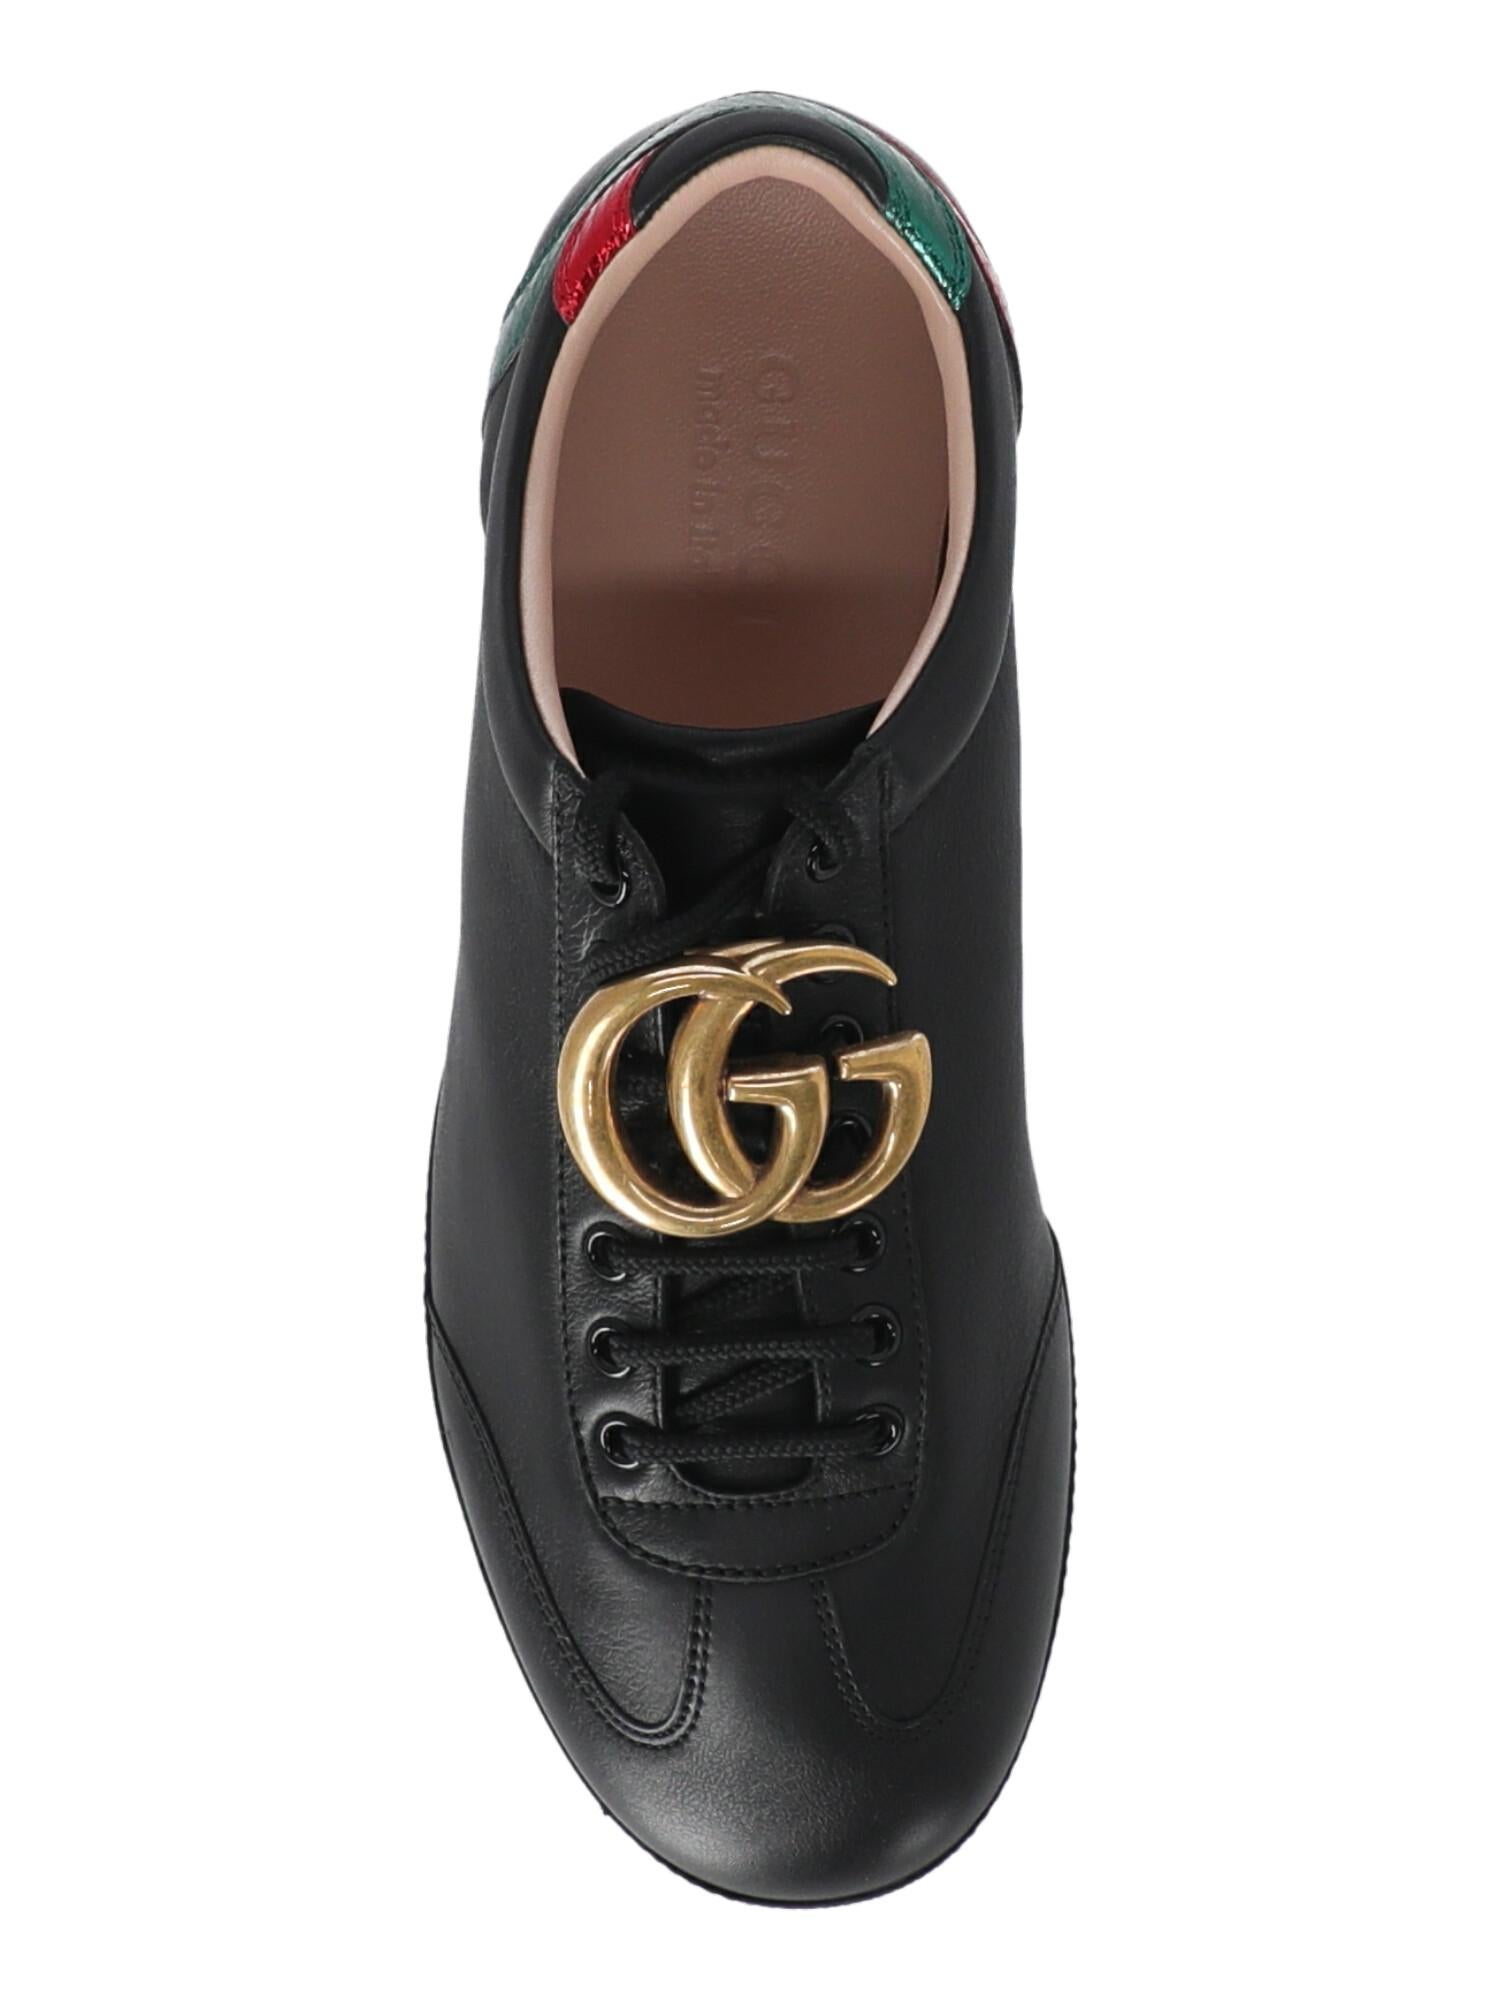 Gucci  Women   Sneakers  Black, Green, Red Leather EU 41.5 For Sale 1